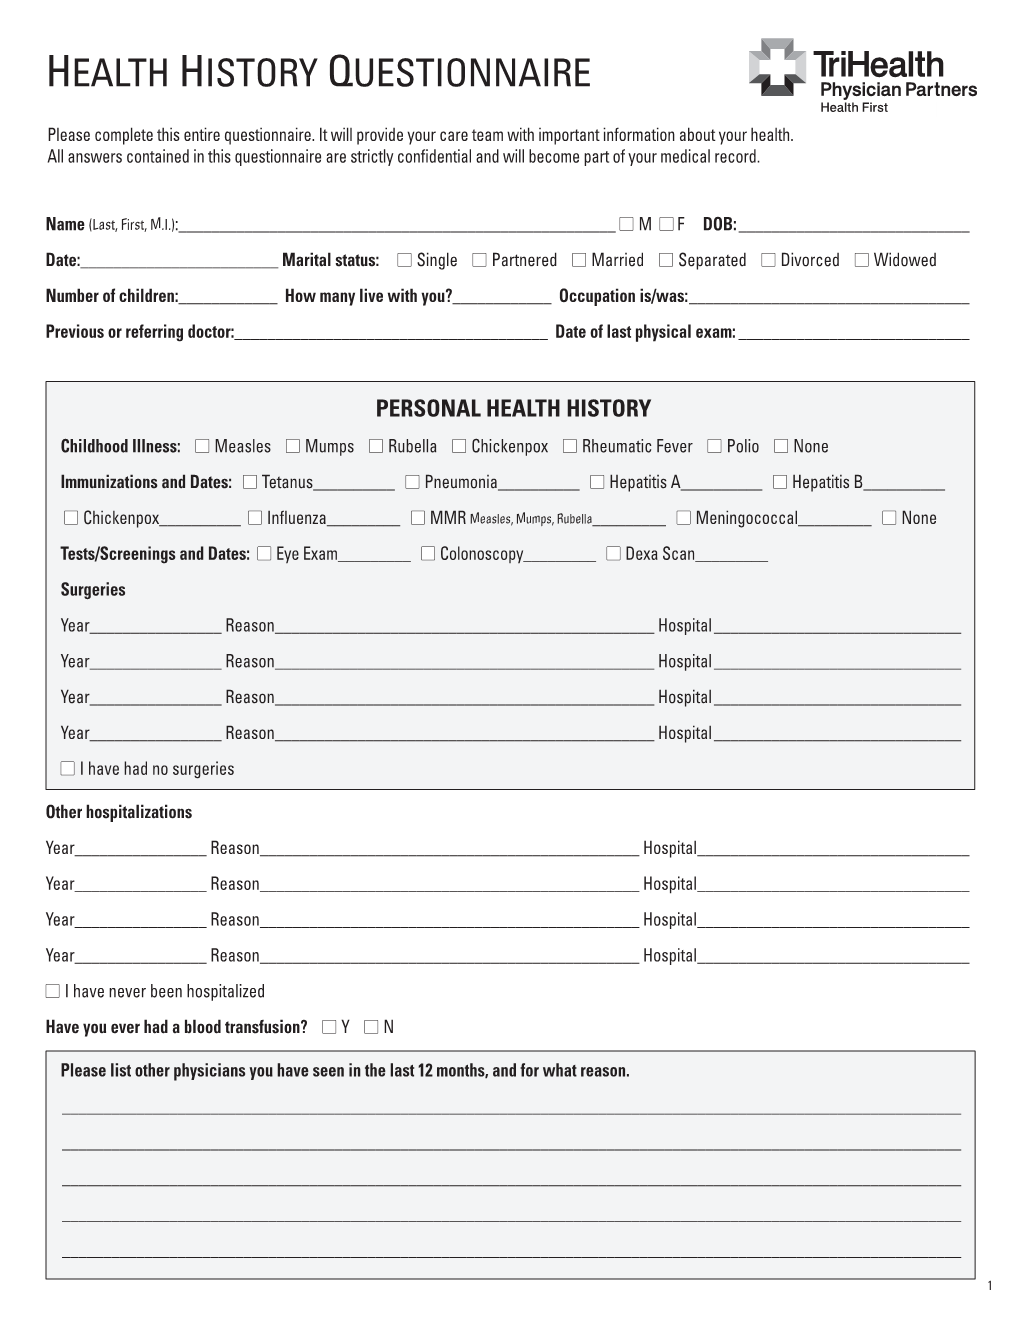 Personal Health History Questionnaire